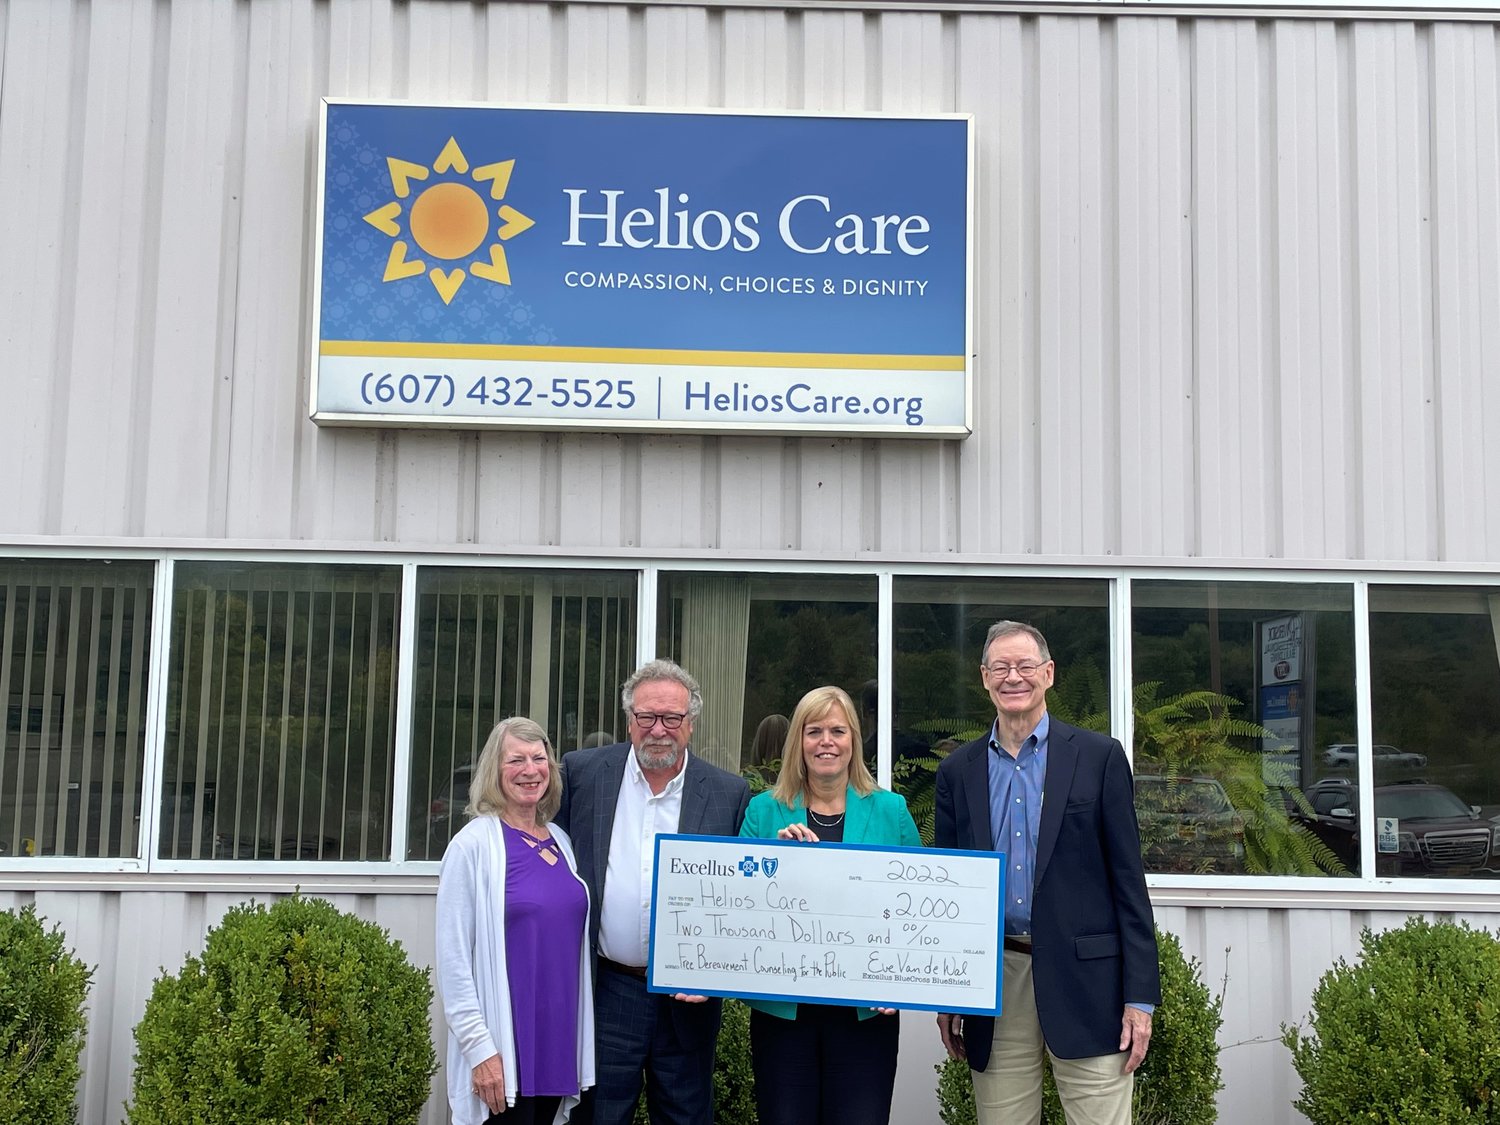 Excellus BlueCross BlueShield recently awarded Helios Care a Community Health Award of $2,000 to support free bereavement counseling for the public. Gathered for the awards presentation are, from left: Connie Jastremski, Helios Care board director; Jeffrey Woepel, Helios Care board of directors chair; Eve Van de Was, Excellus BCBS regional president; and Dan Ayres, Helios Care president/CEO.